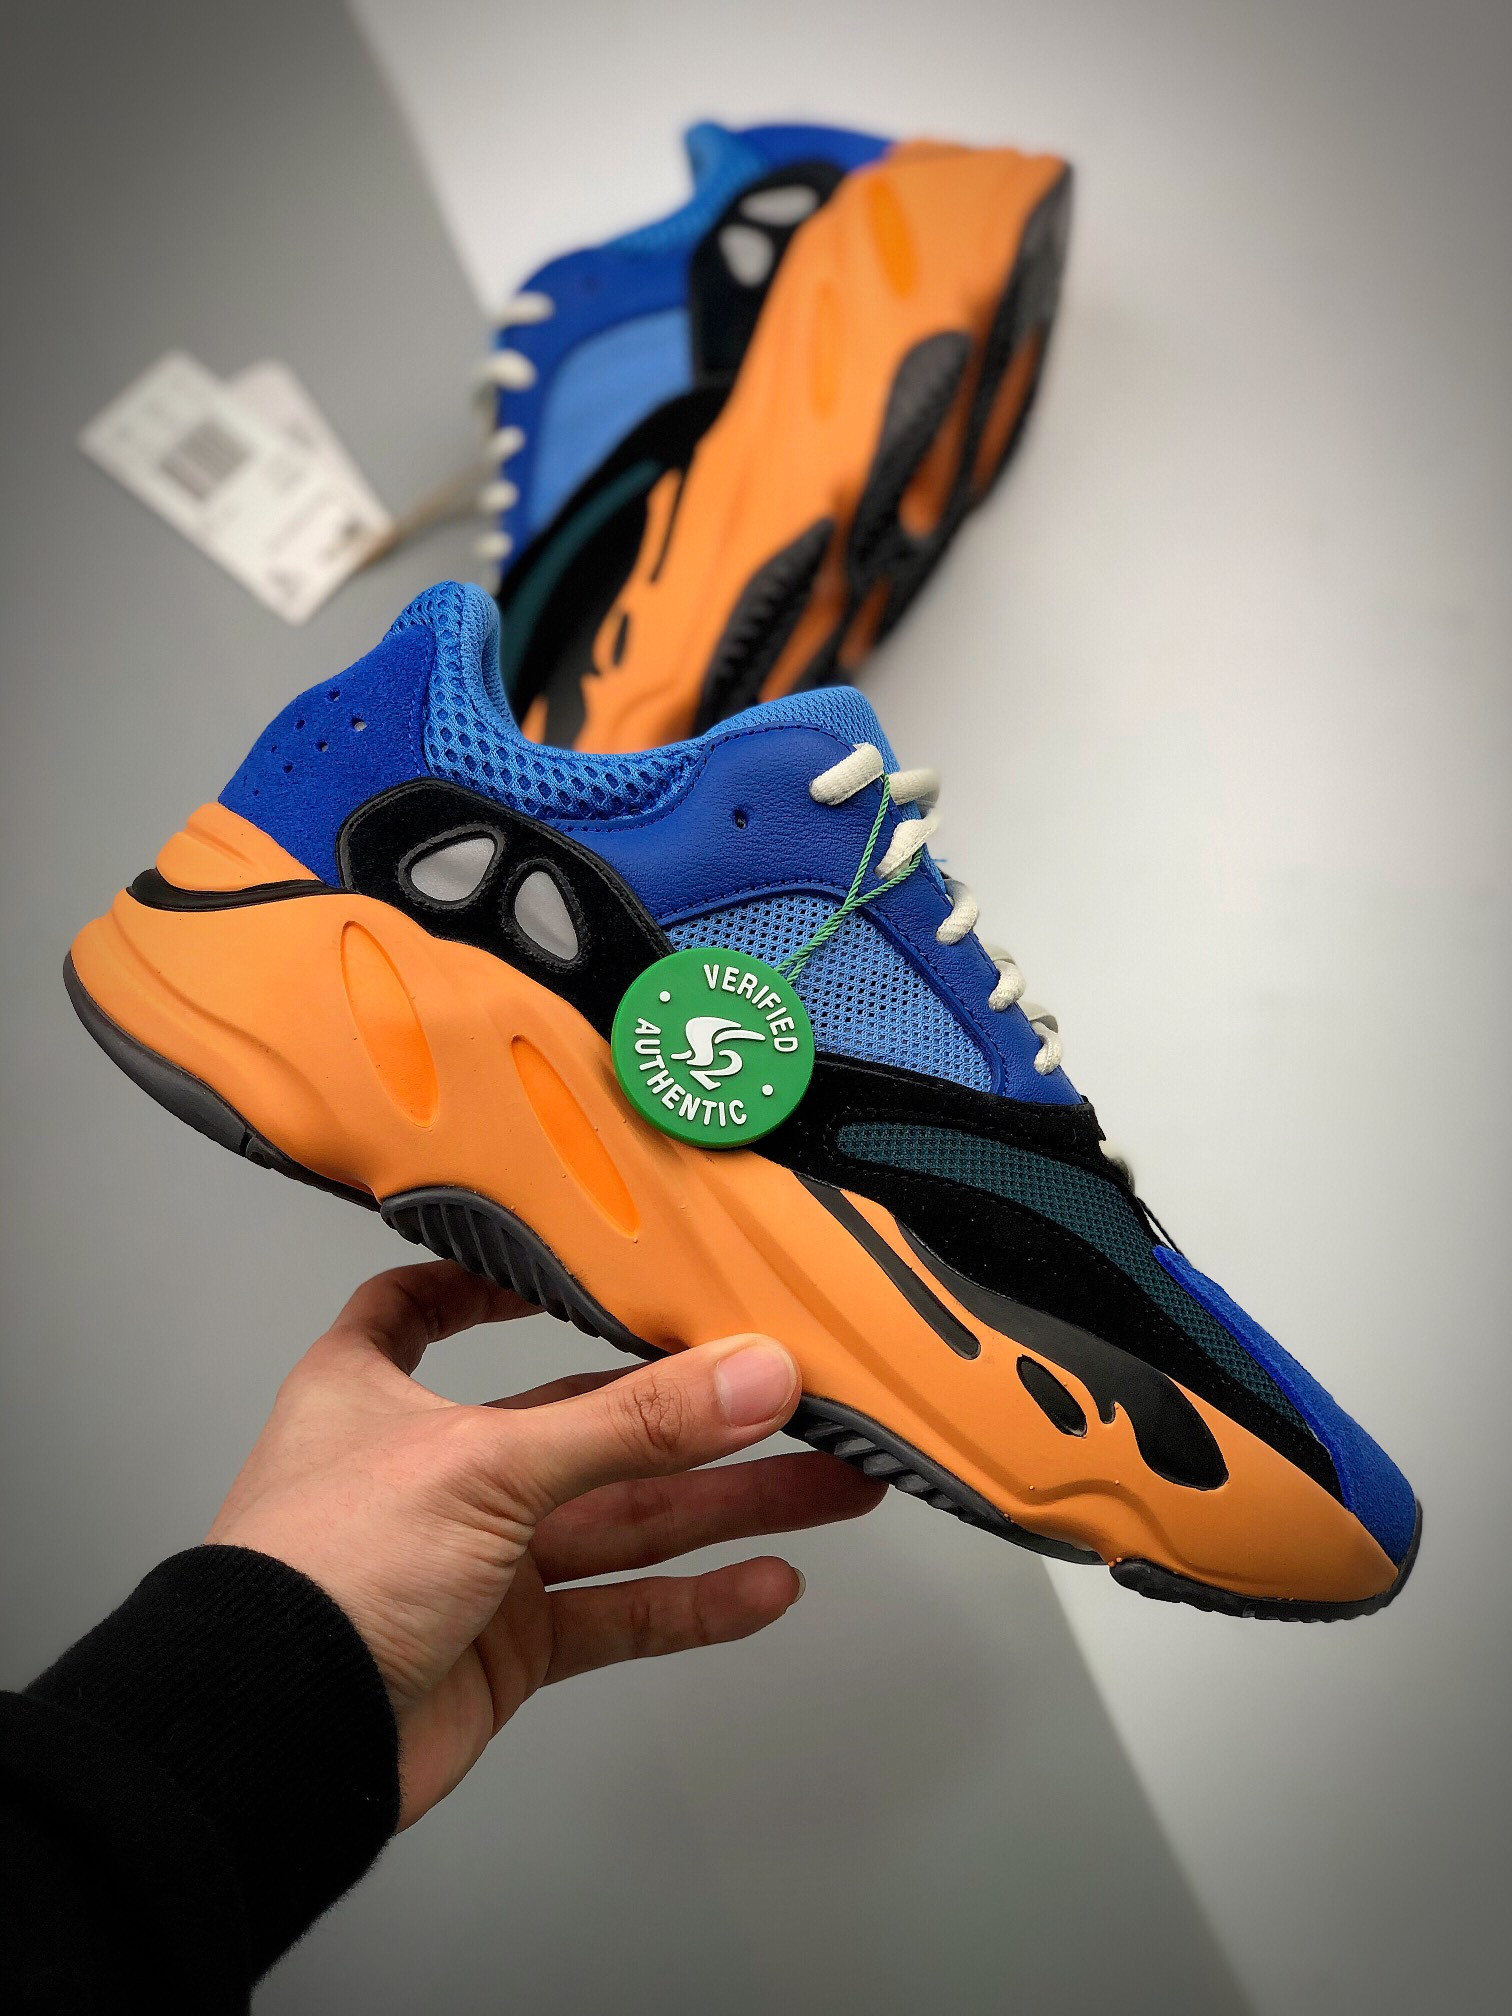 Adidas Yeezy Boost 700 Bright Blue GZ0541 For Sale